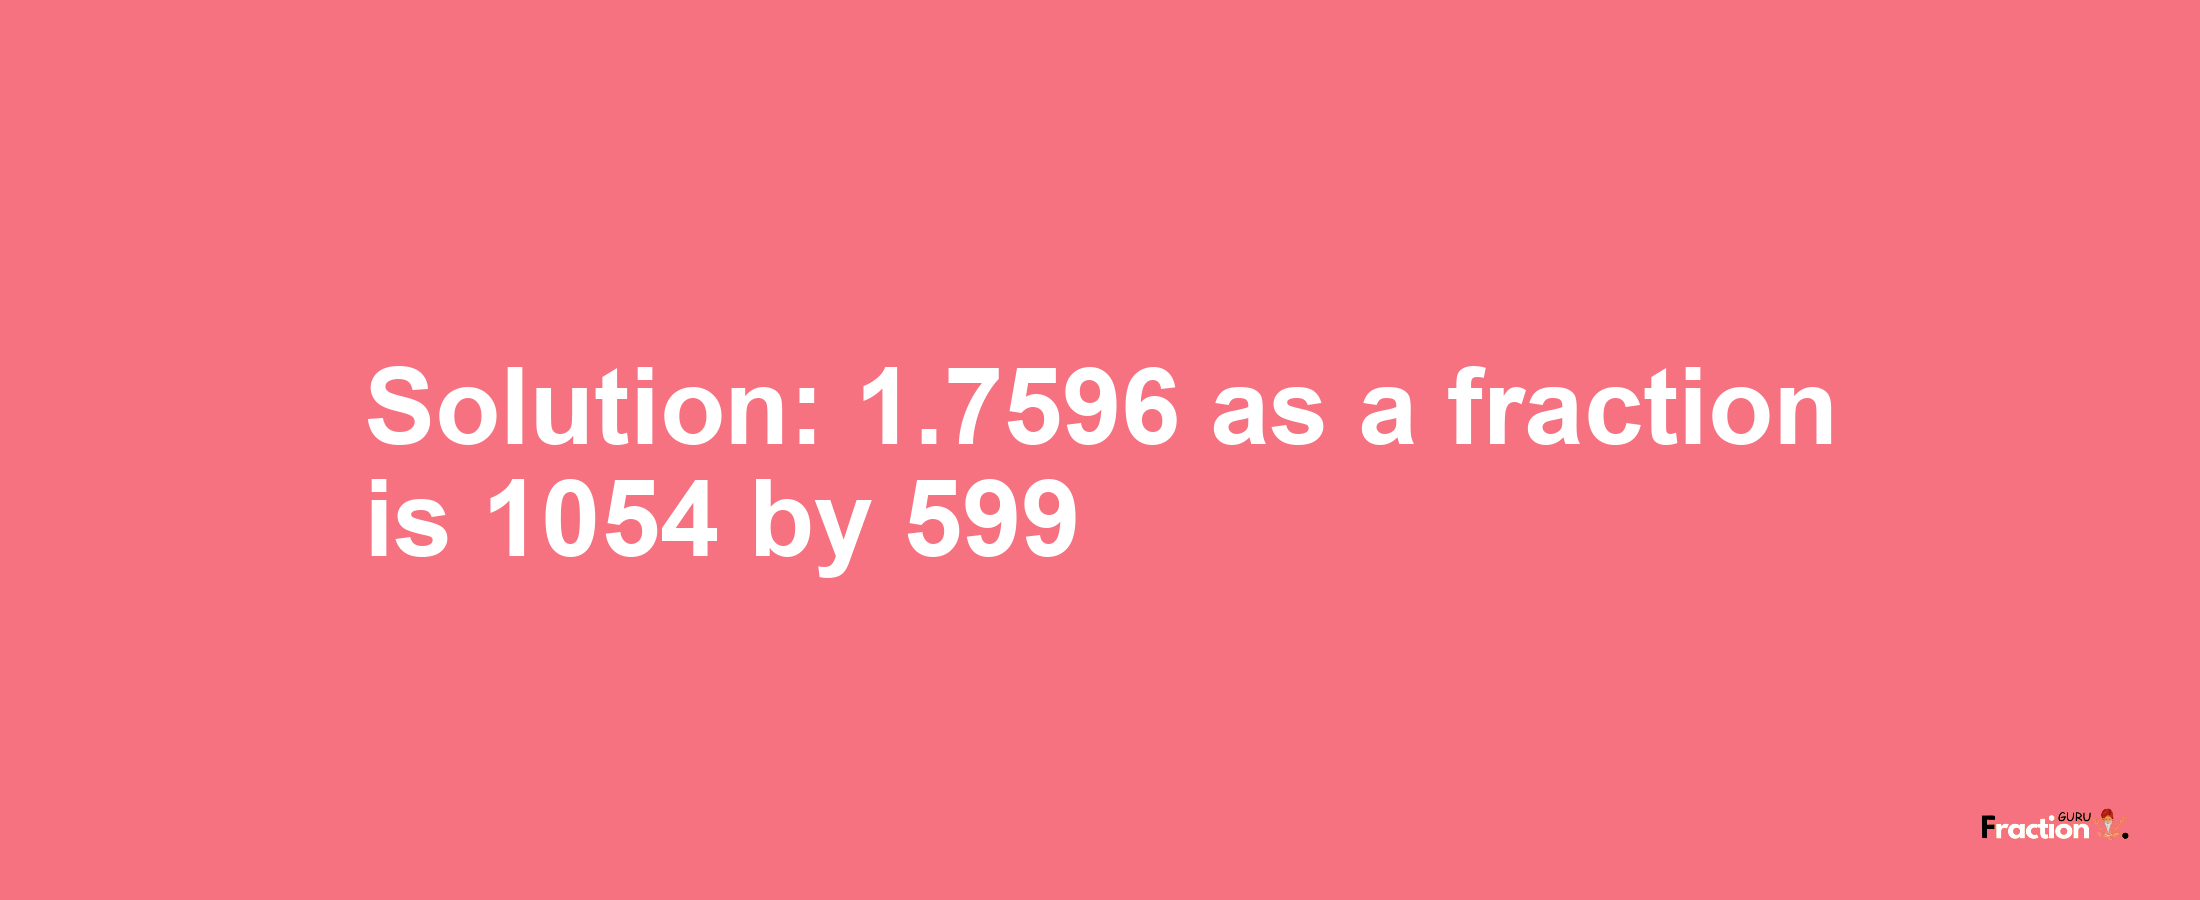 Solution:1.7596 as a fraction is 1054/599